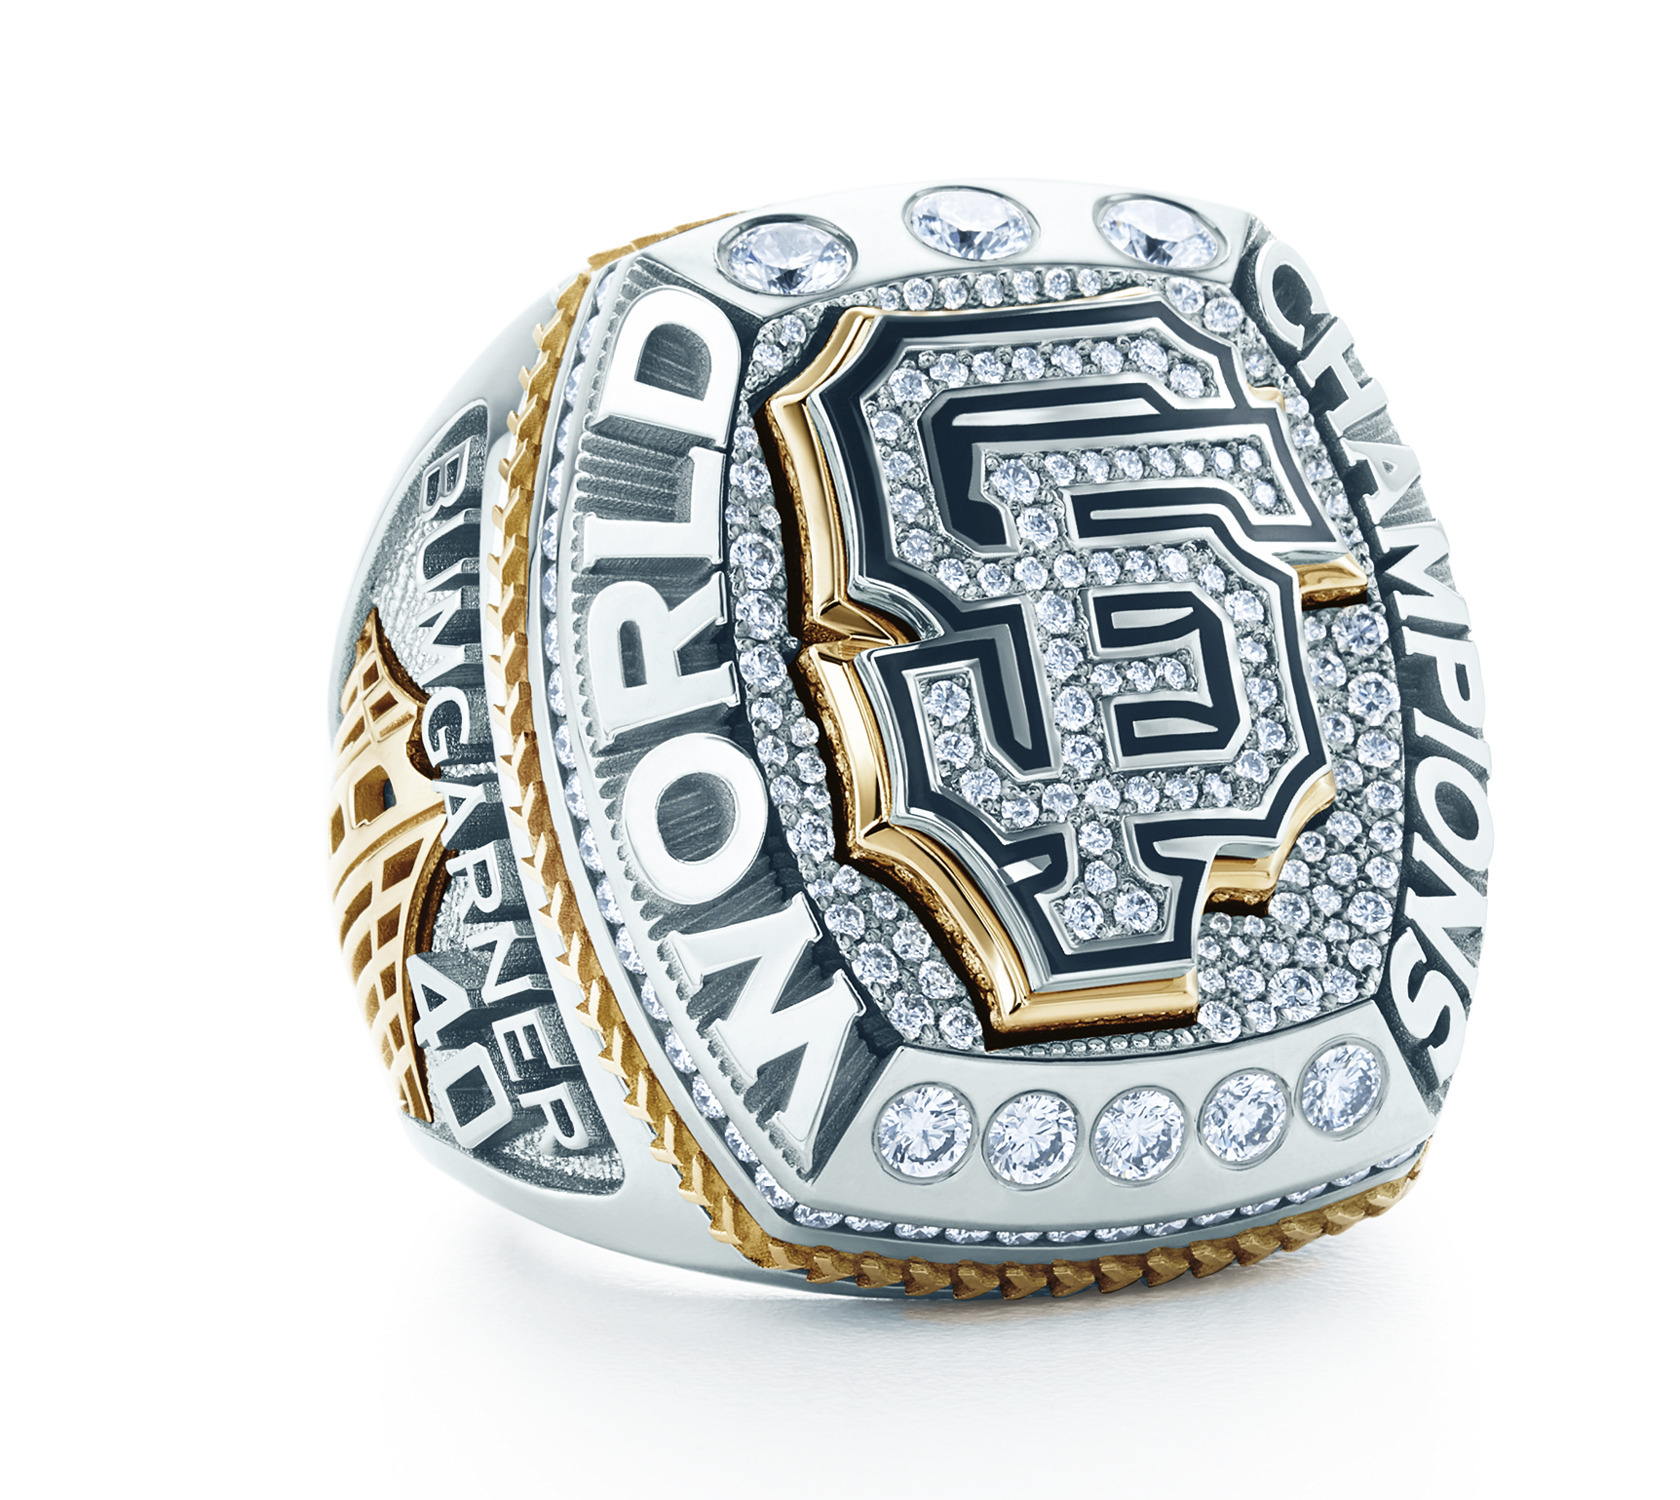 SF Giants 2014 World Series Champions - EMI Sports Central